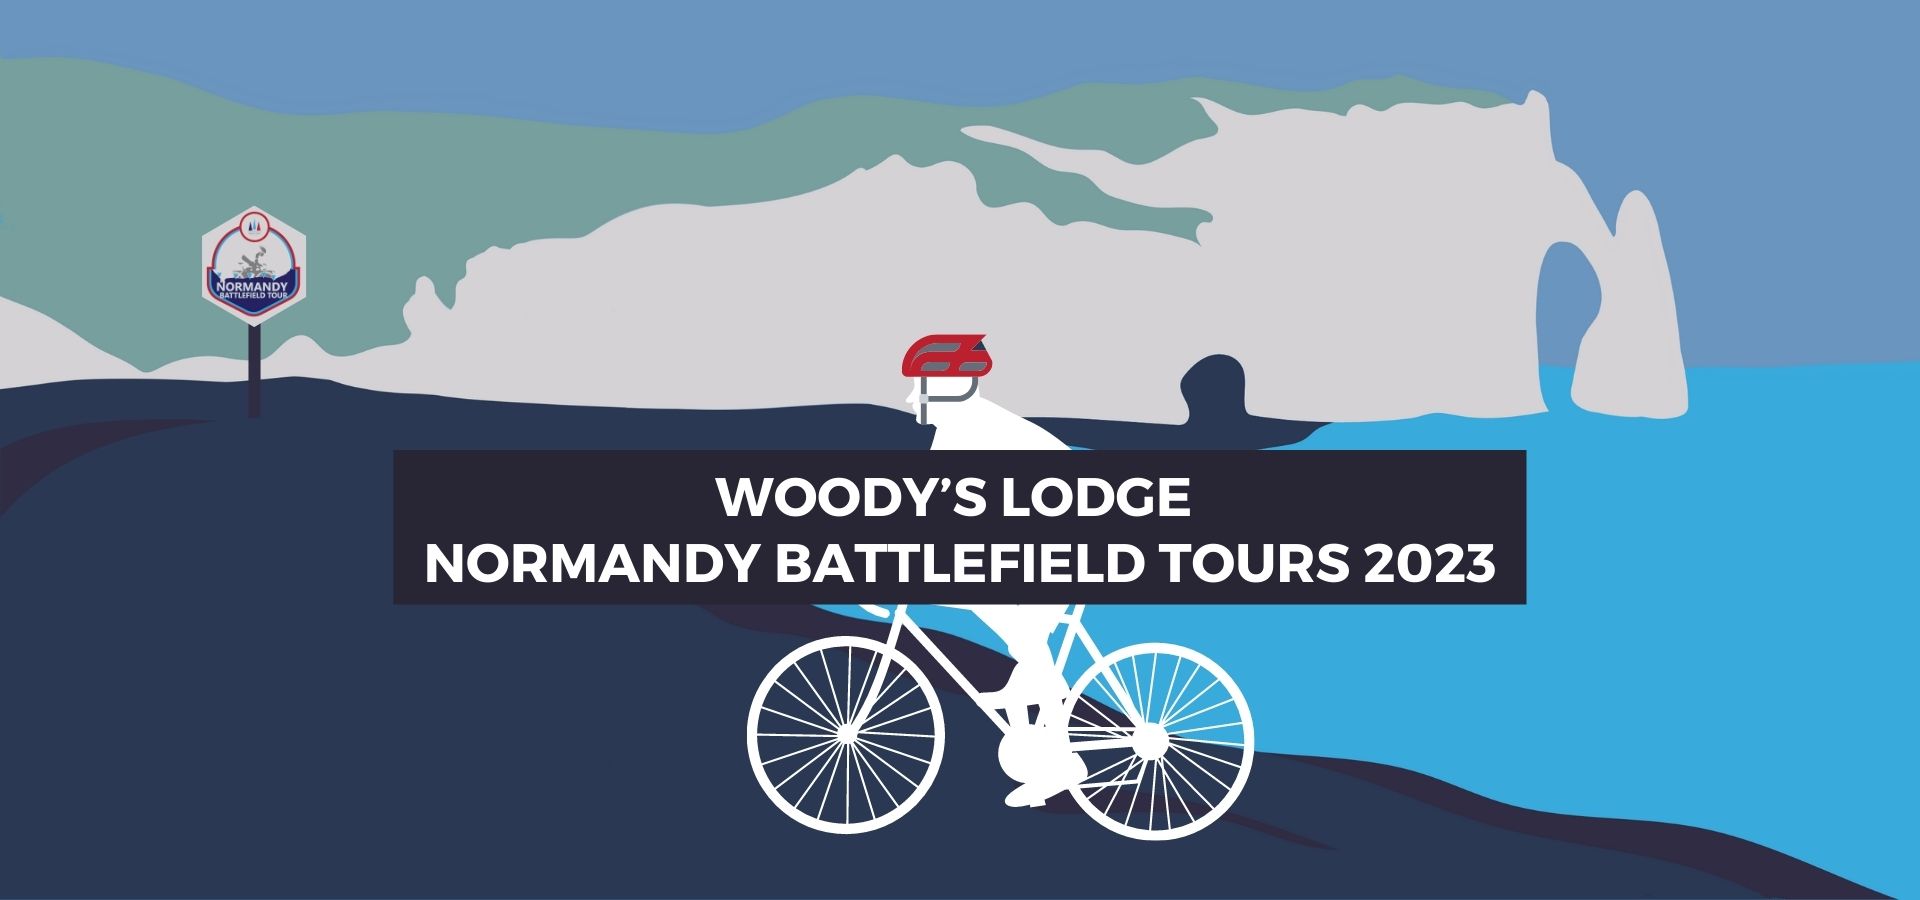 Woody's Lodge Normandy Battlefield Tours 2023